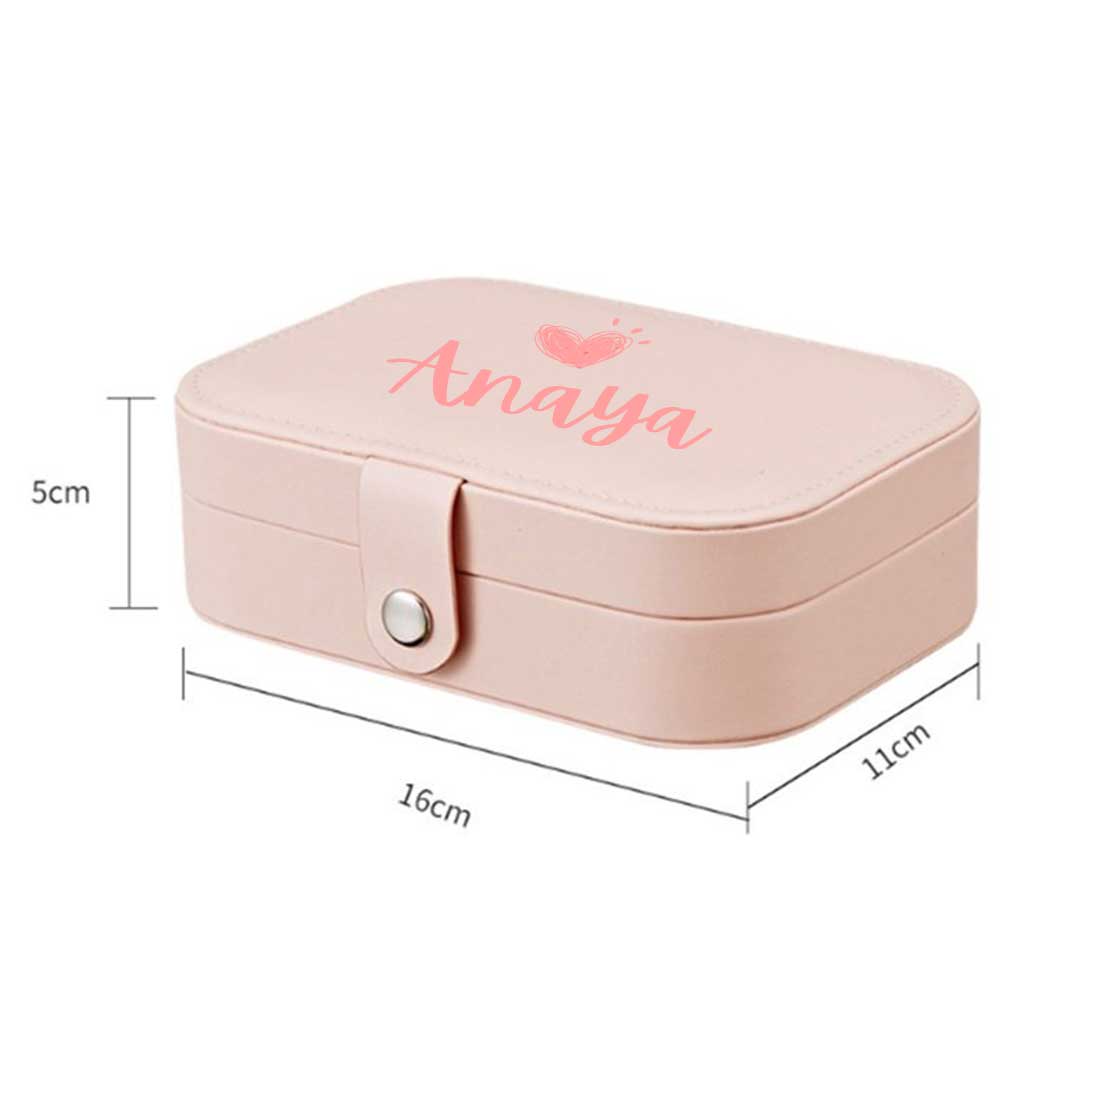 Customized Jewellery Storage Pouch for Girls Travel Storage Case for Rings Earrings and Pendants-Your Name